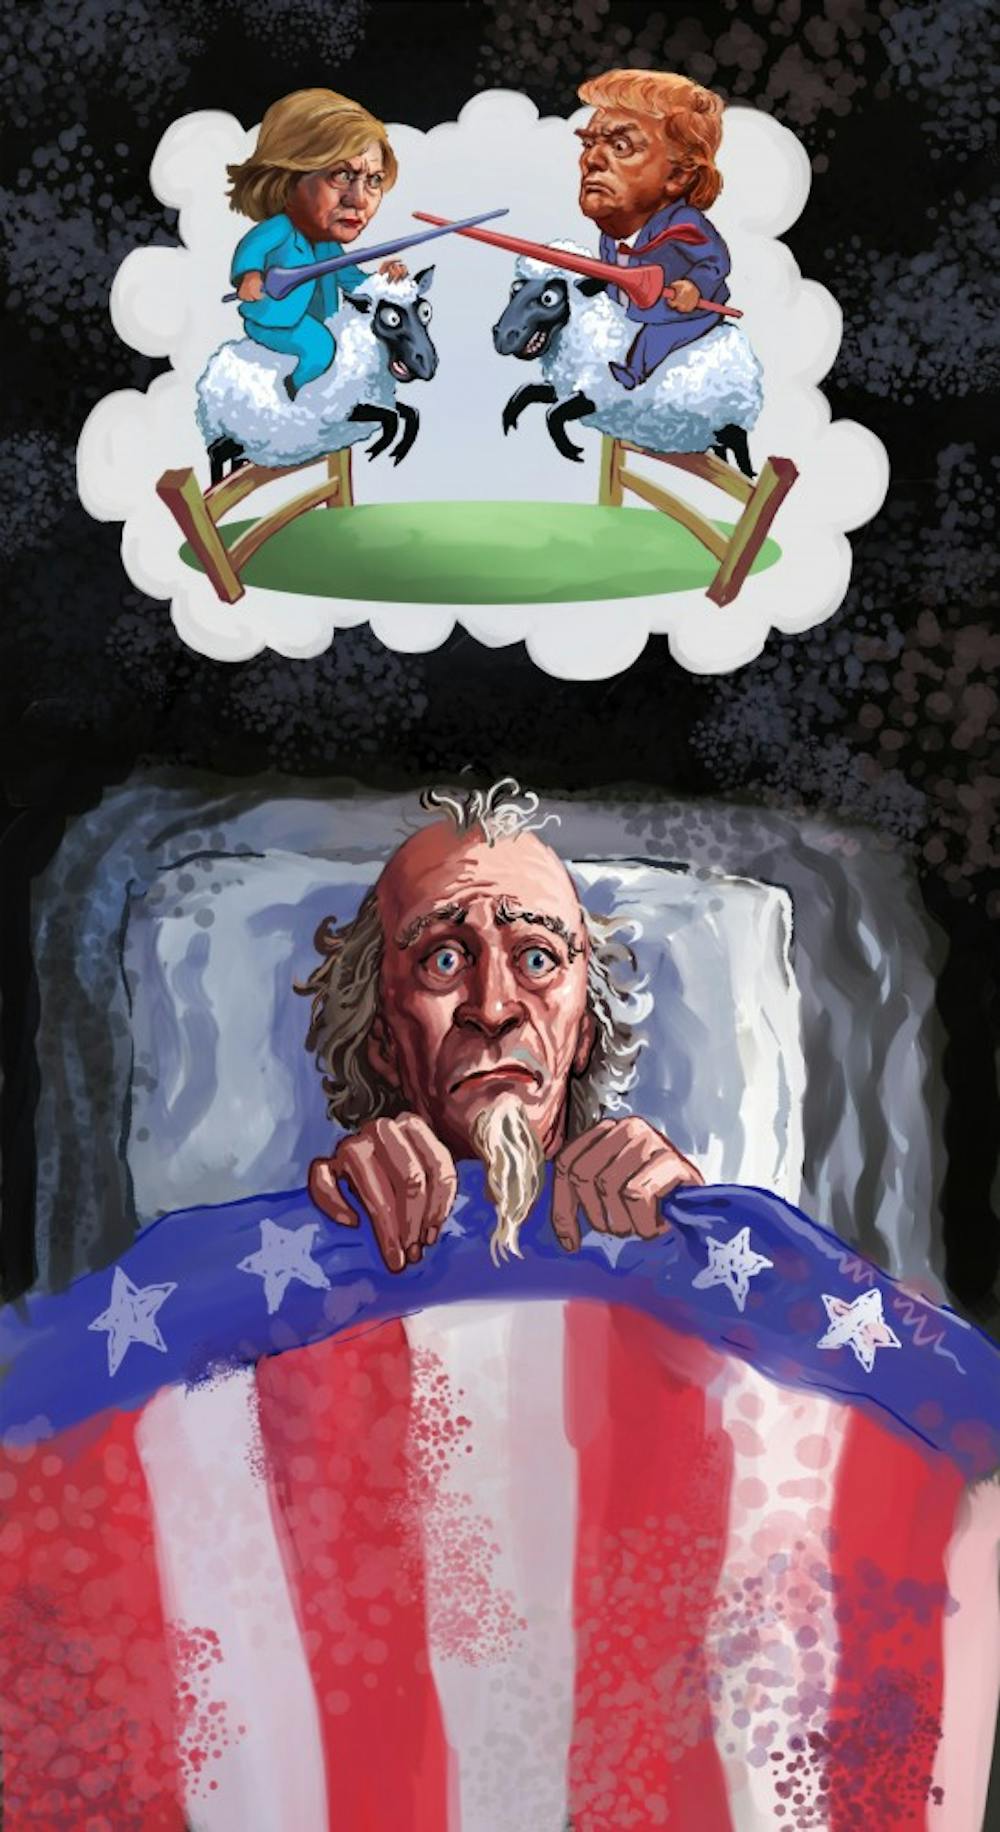 300 dpi Jeff Durham illustration relating to stress about the election. (Bay Area News Group/TNS)